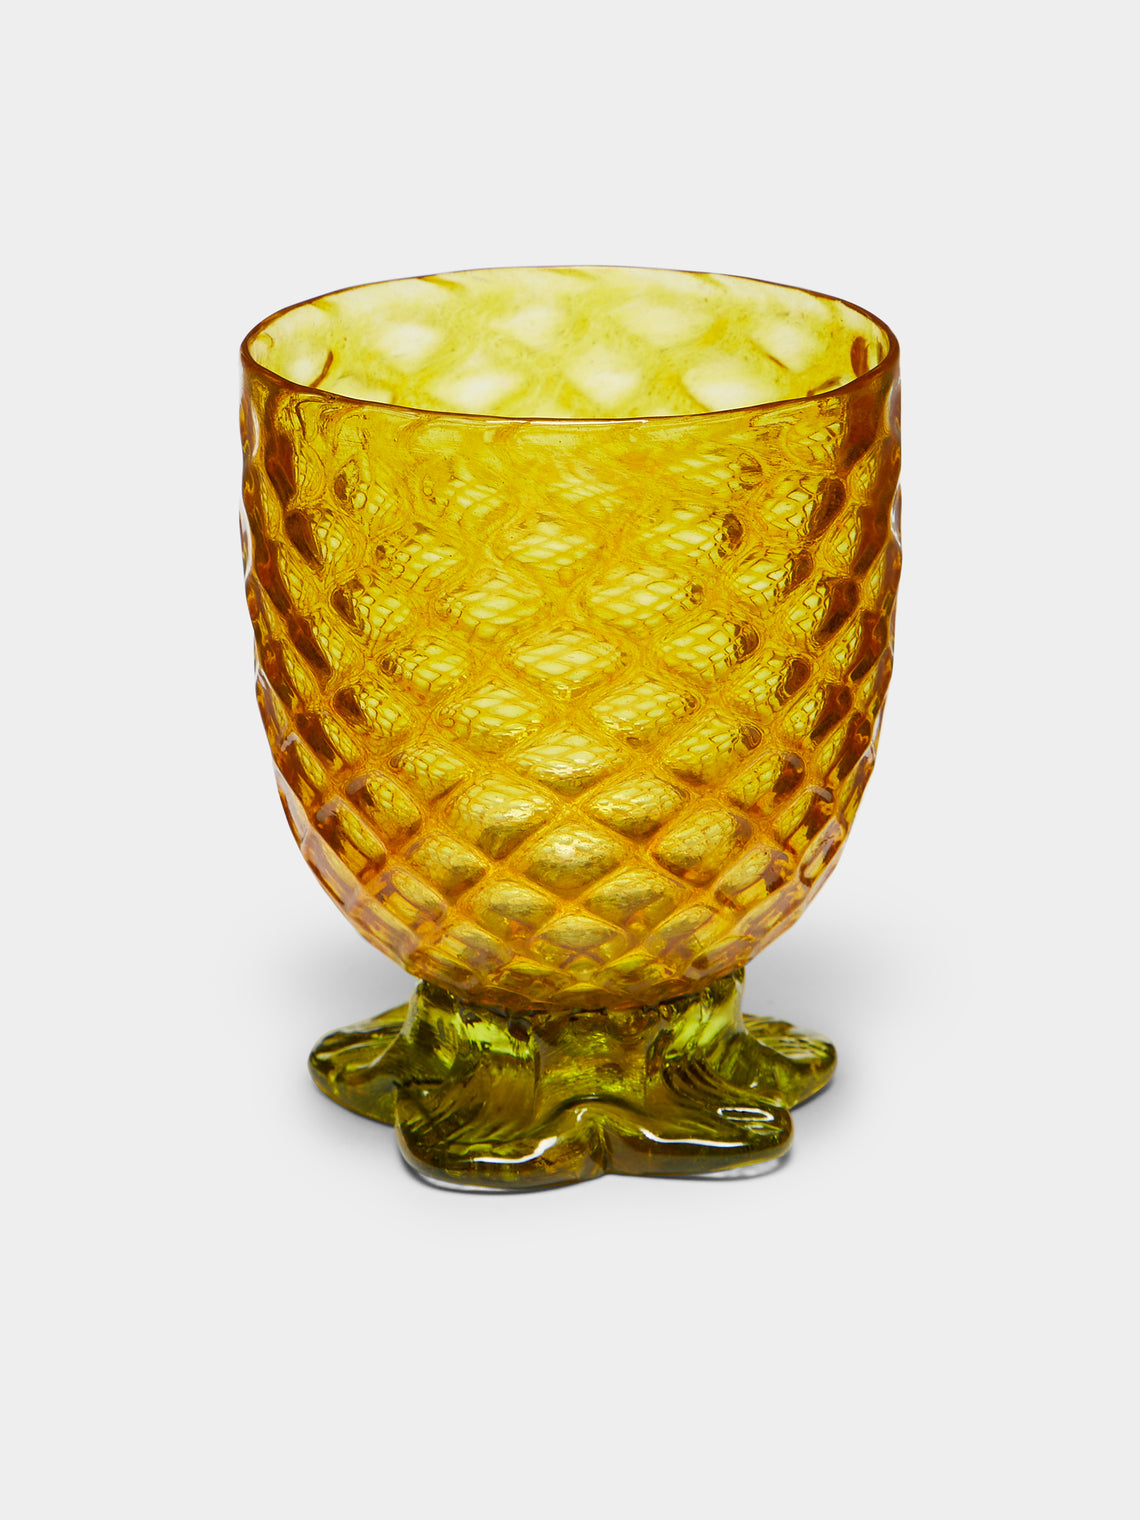 Andrew Iannazzi - Pineapple Hand-Blown Glass Tumblers (Set of 4) -  - ABASK - 